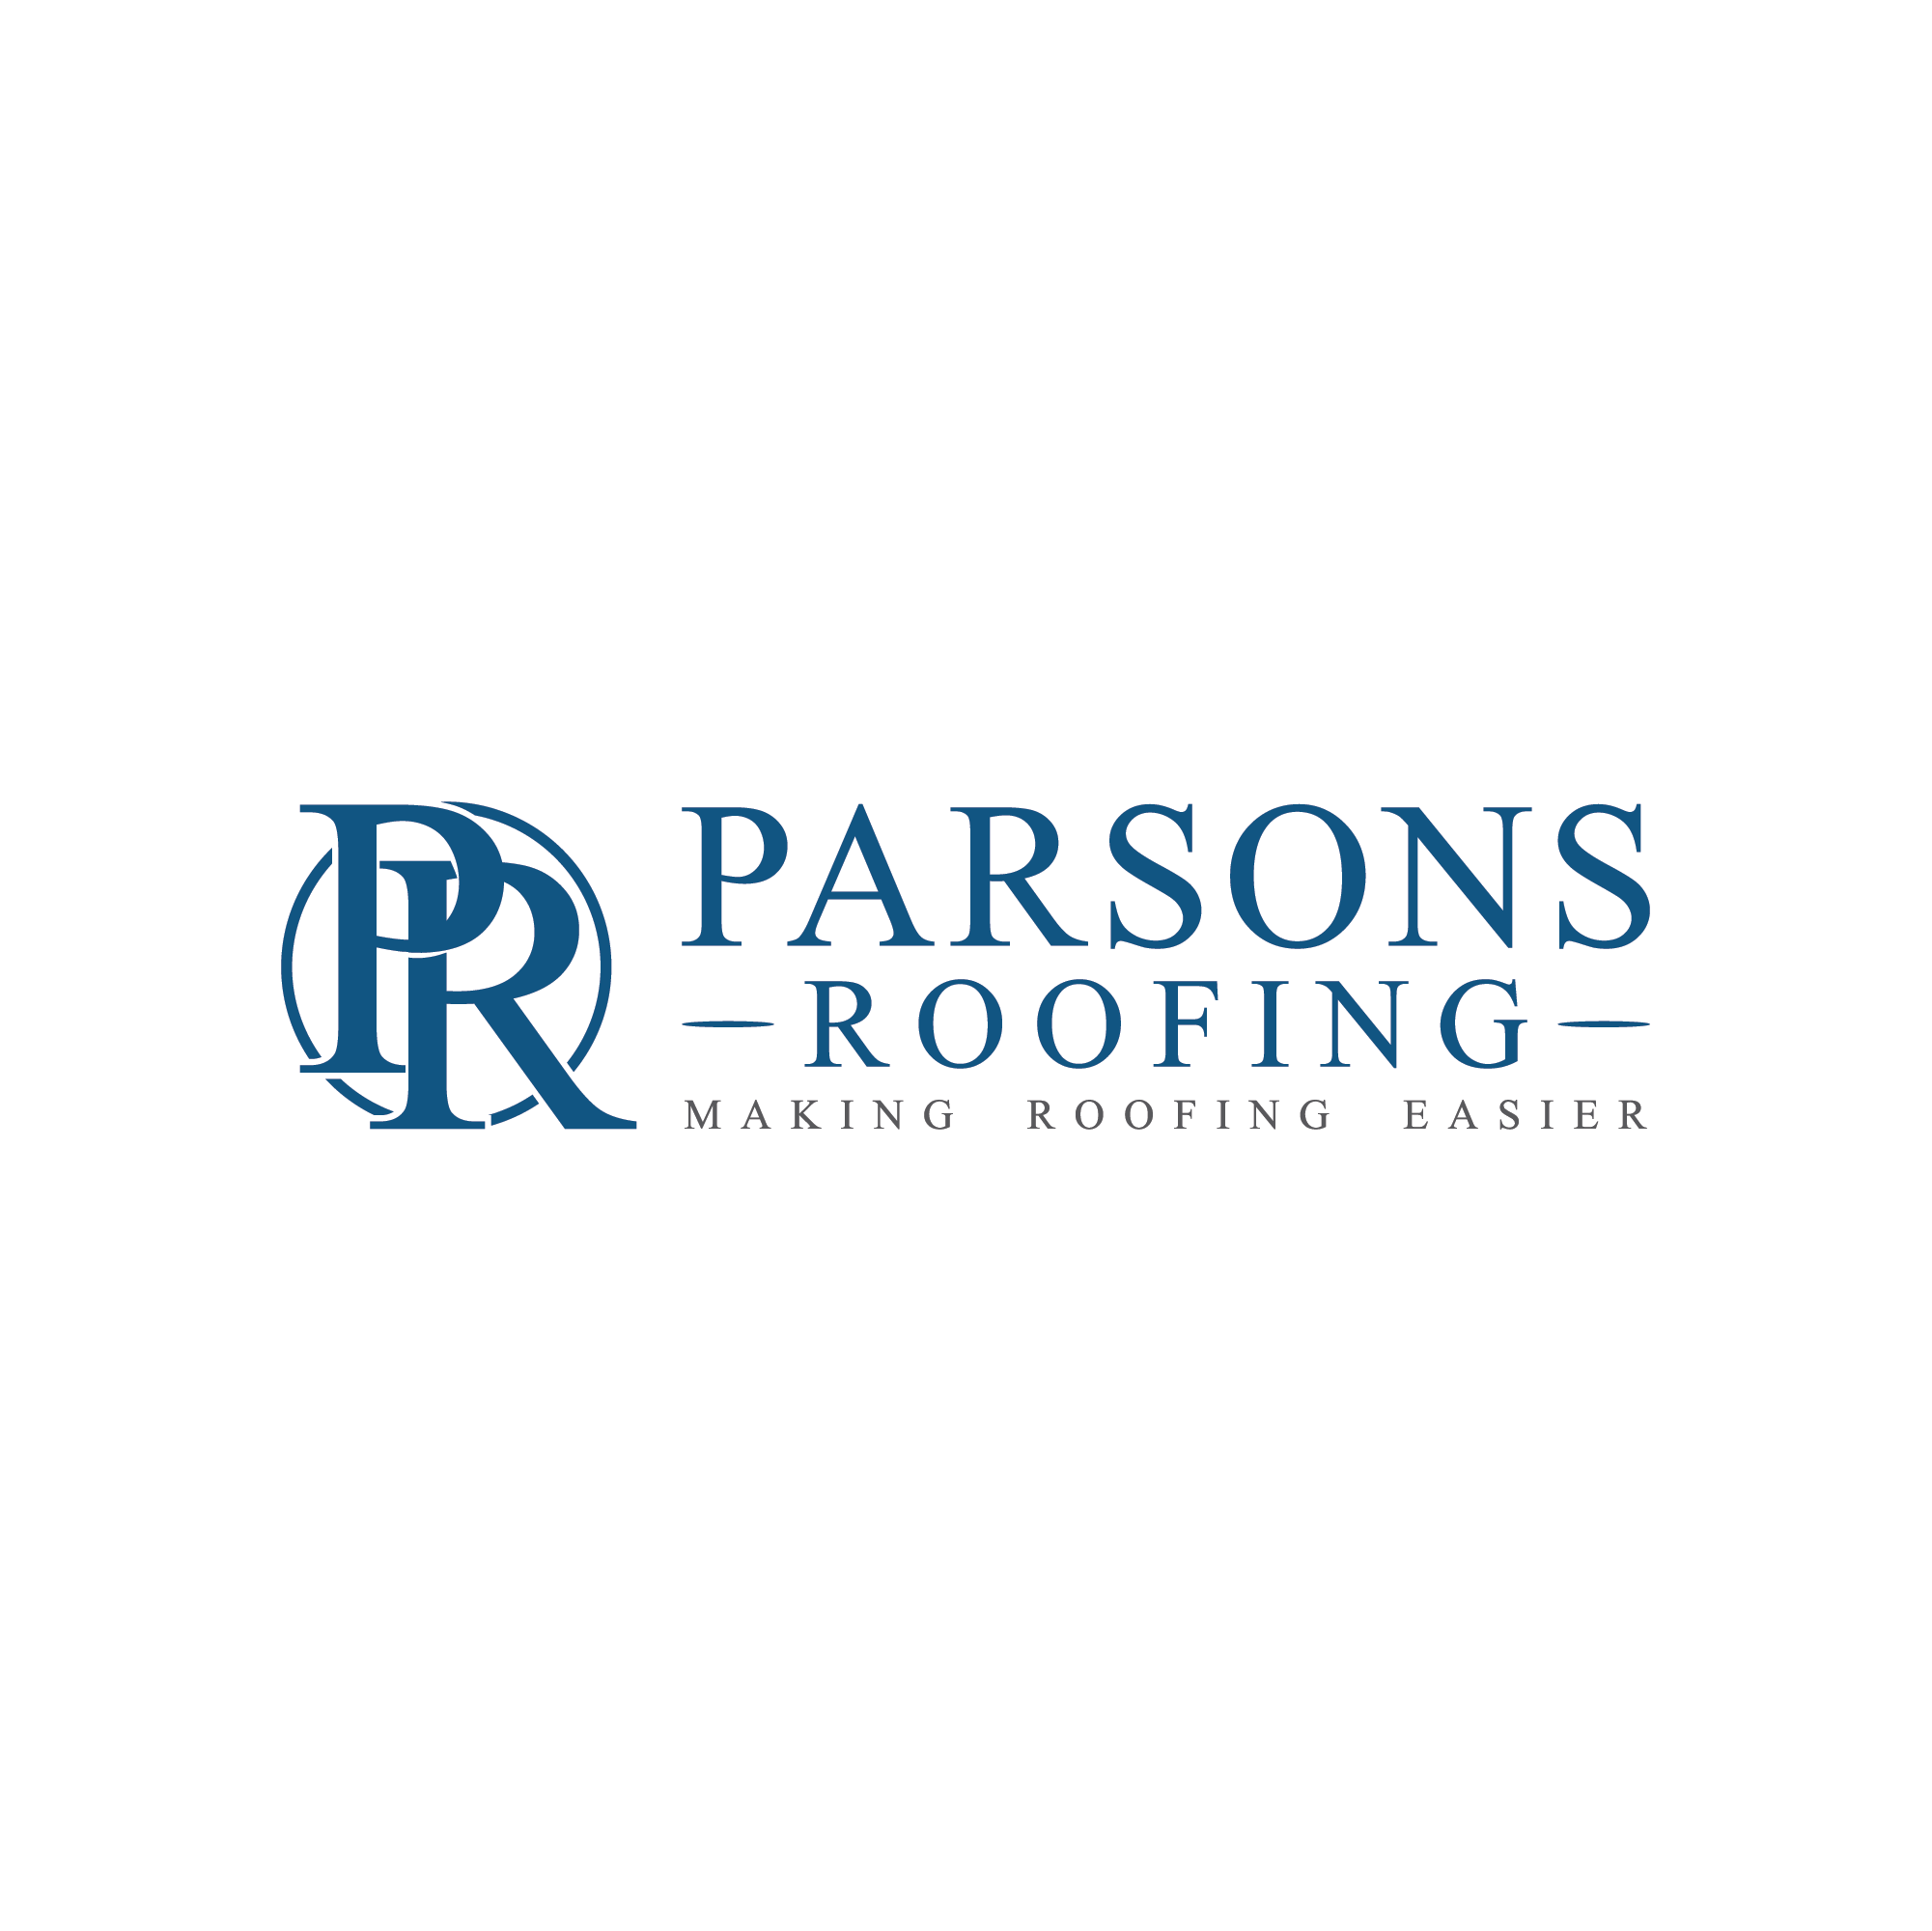 Get your logo design for realtors, roofing, real estate, property,  construction, and home services.